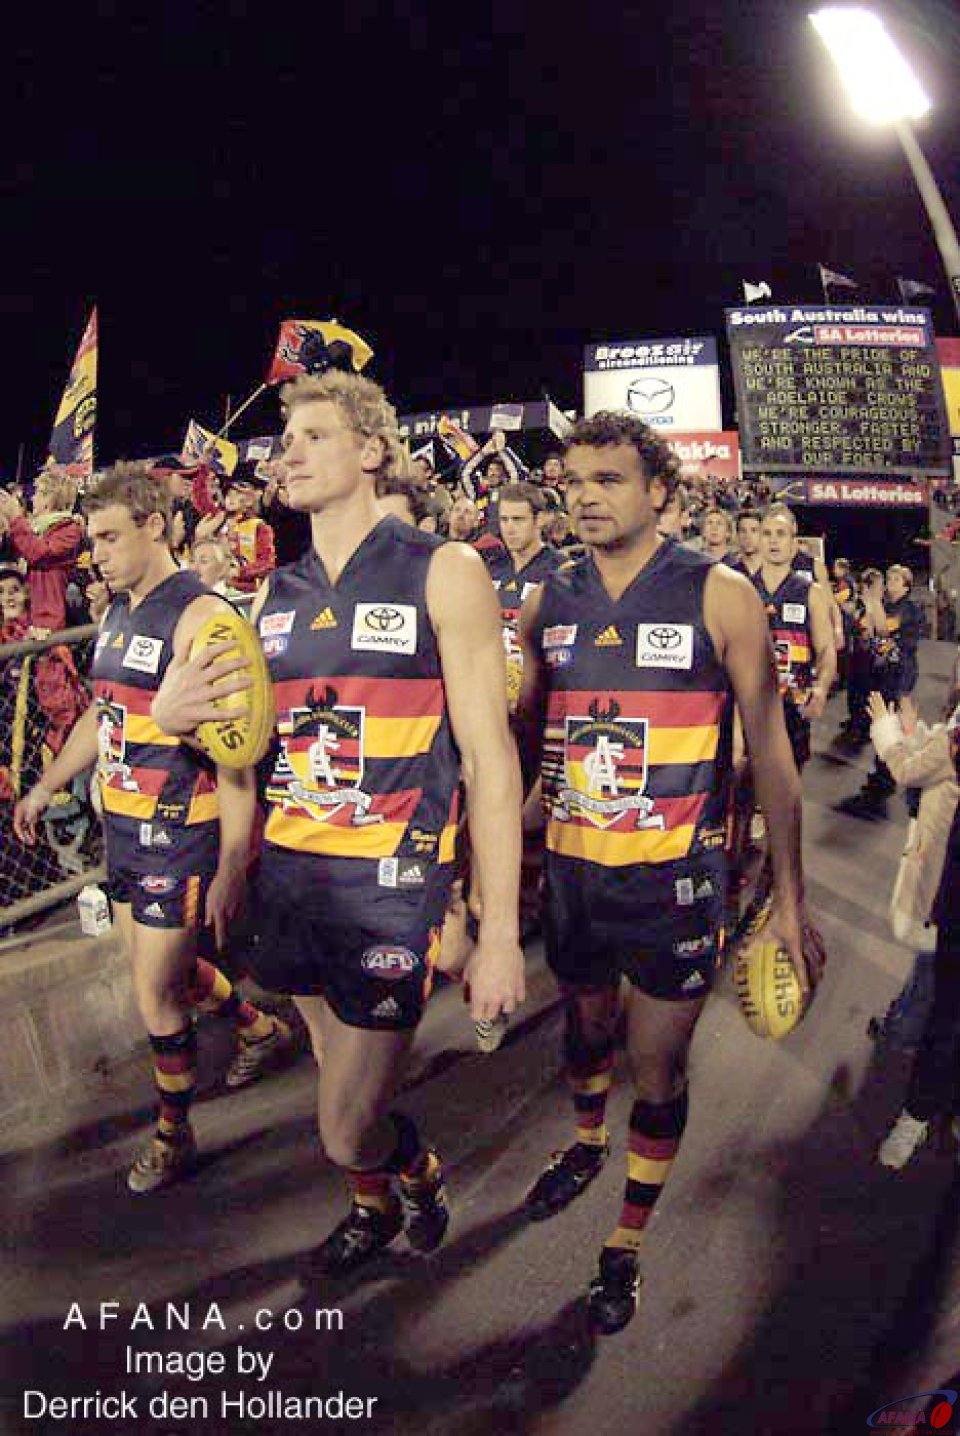 [b]Adelaide Crows players follow their captain onto the field of battle[/b]